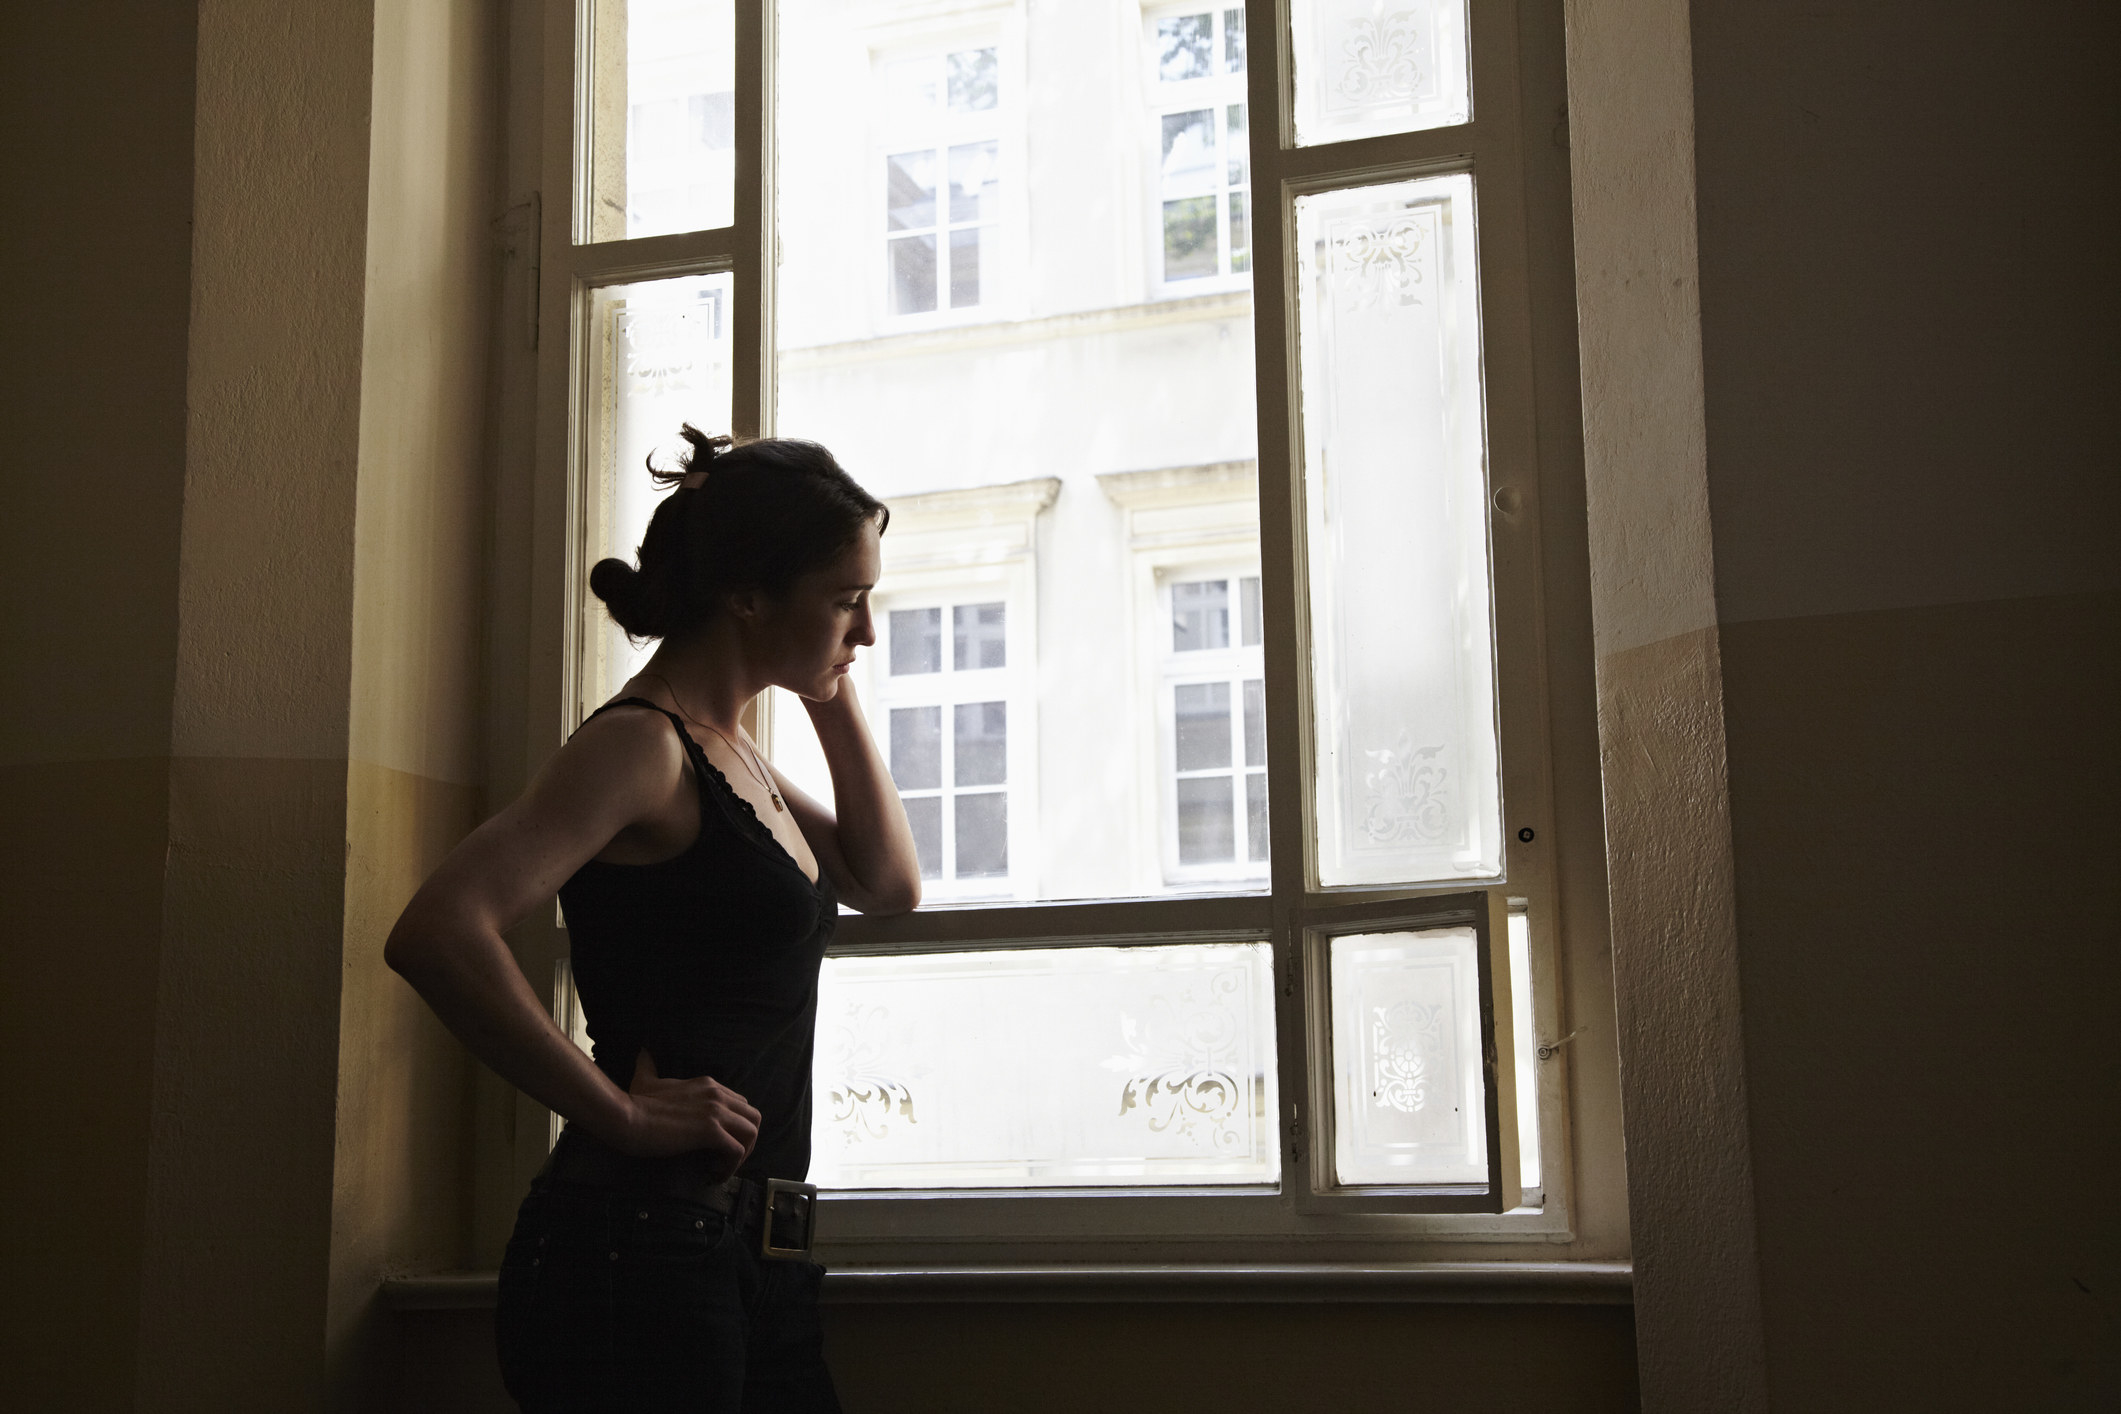 A young woman stands by a window in a dark room, deep in thought